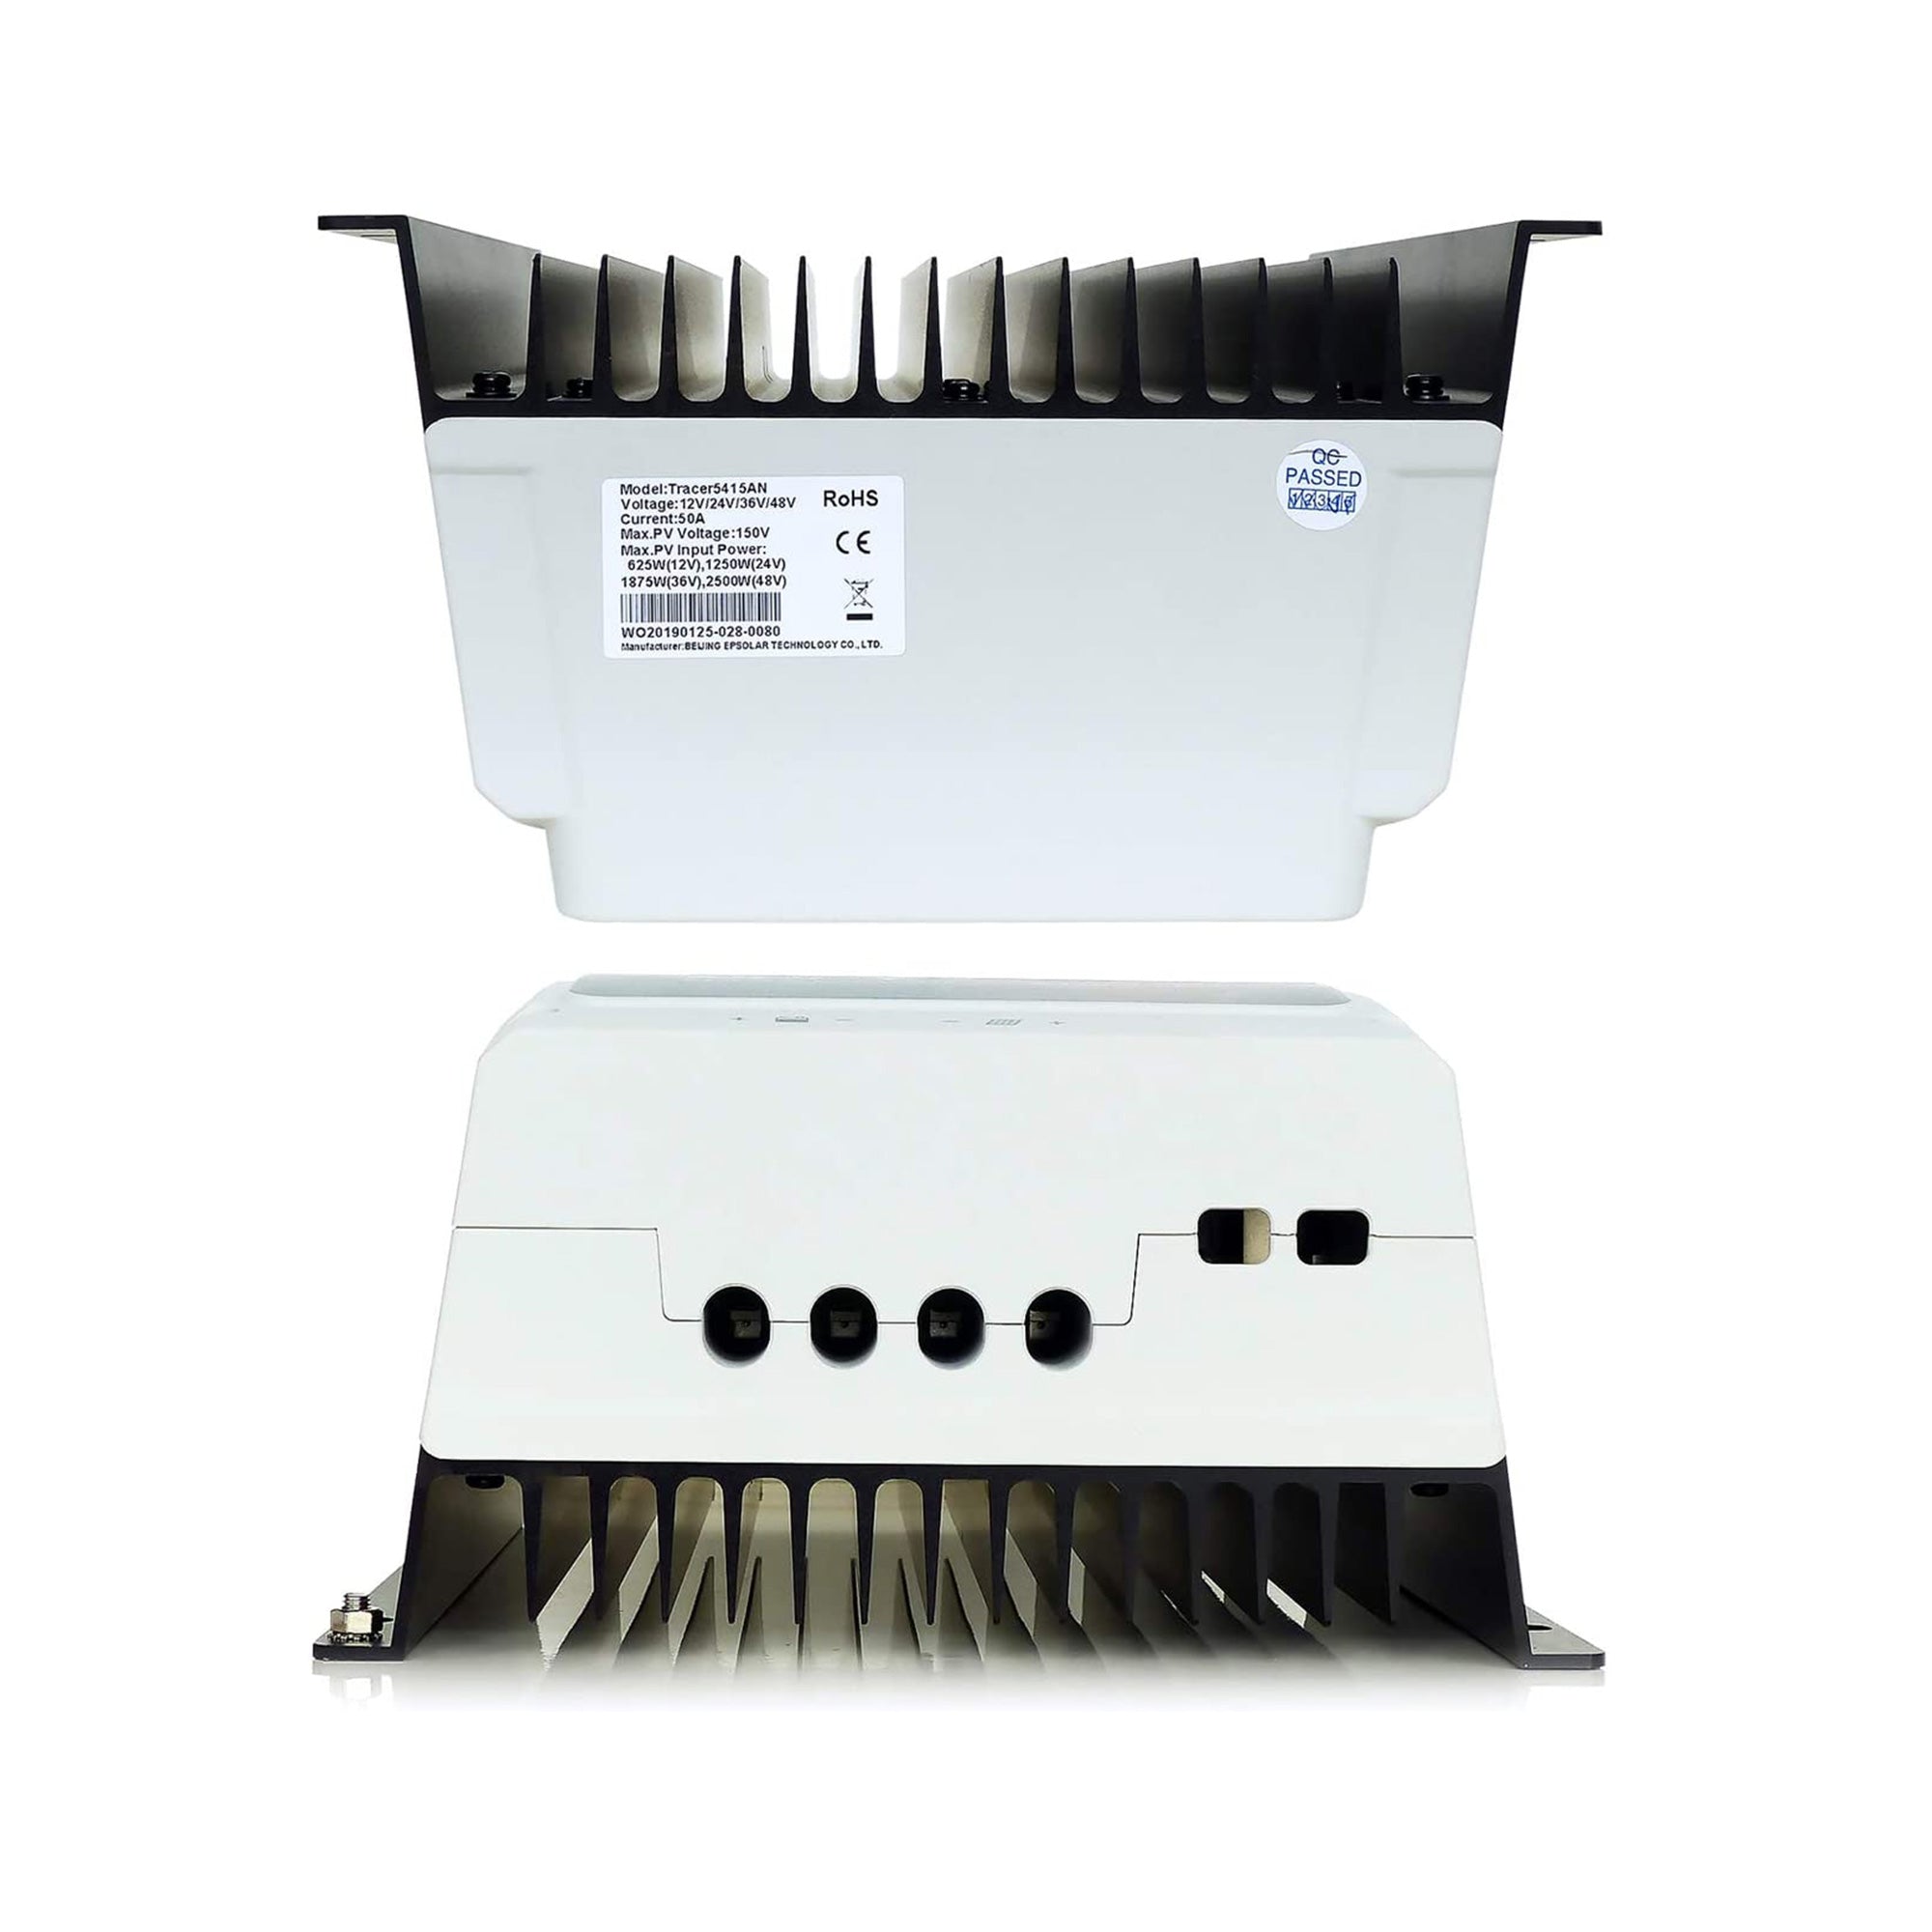 50A MPPT Solar Charge Controller